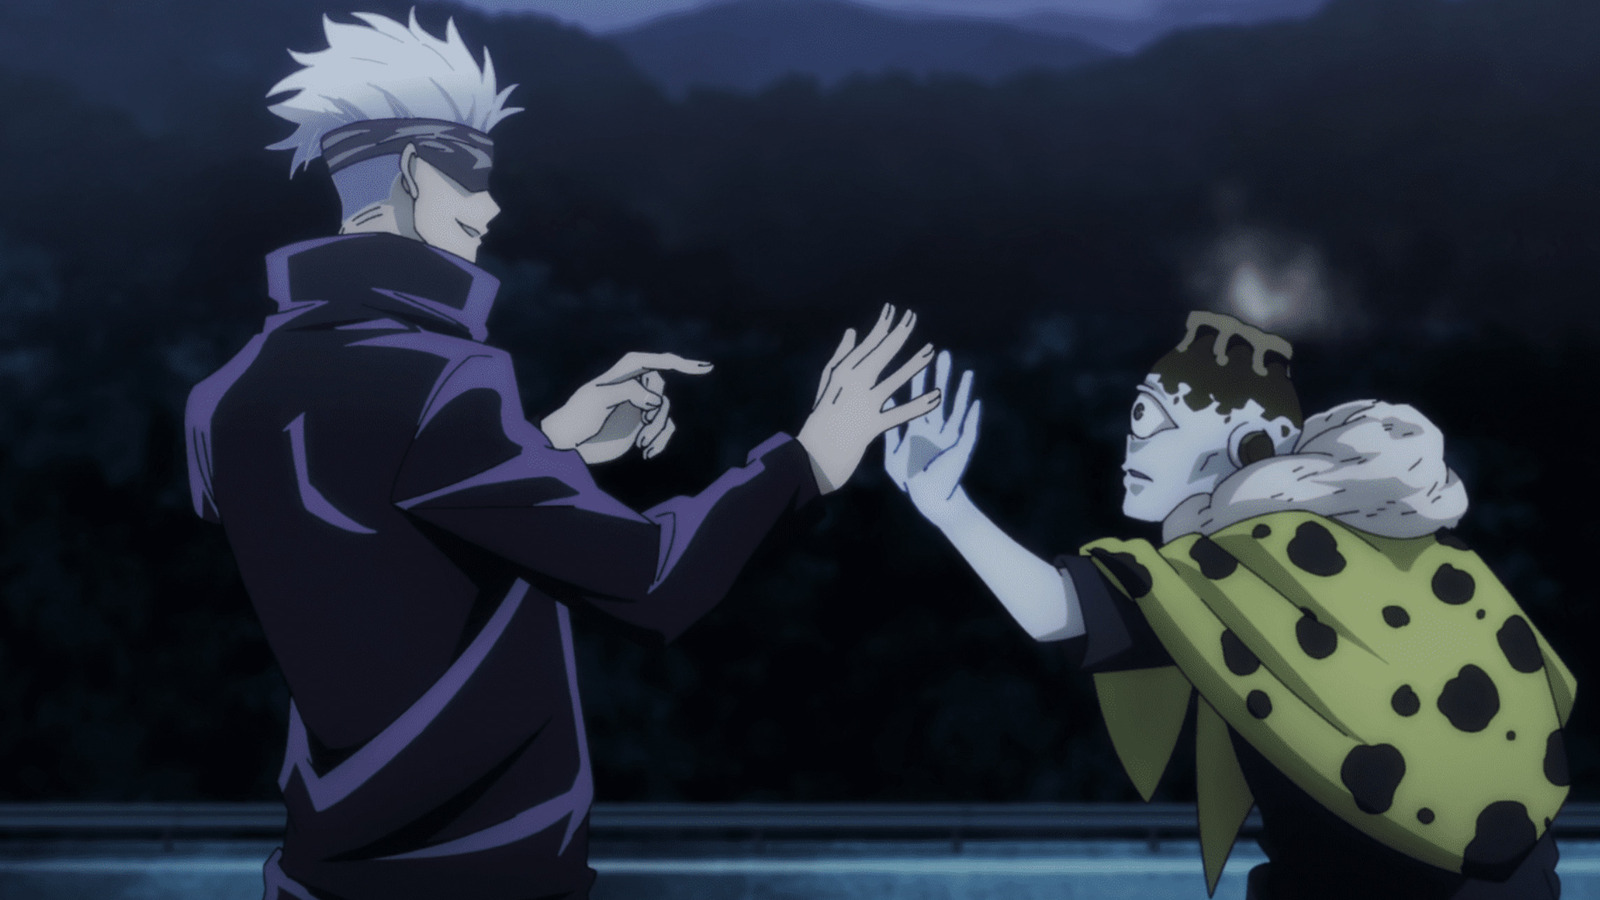 Adapting Jujutsu Kaisen's Fight Scenes To Anime Was The Easy Part